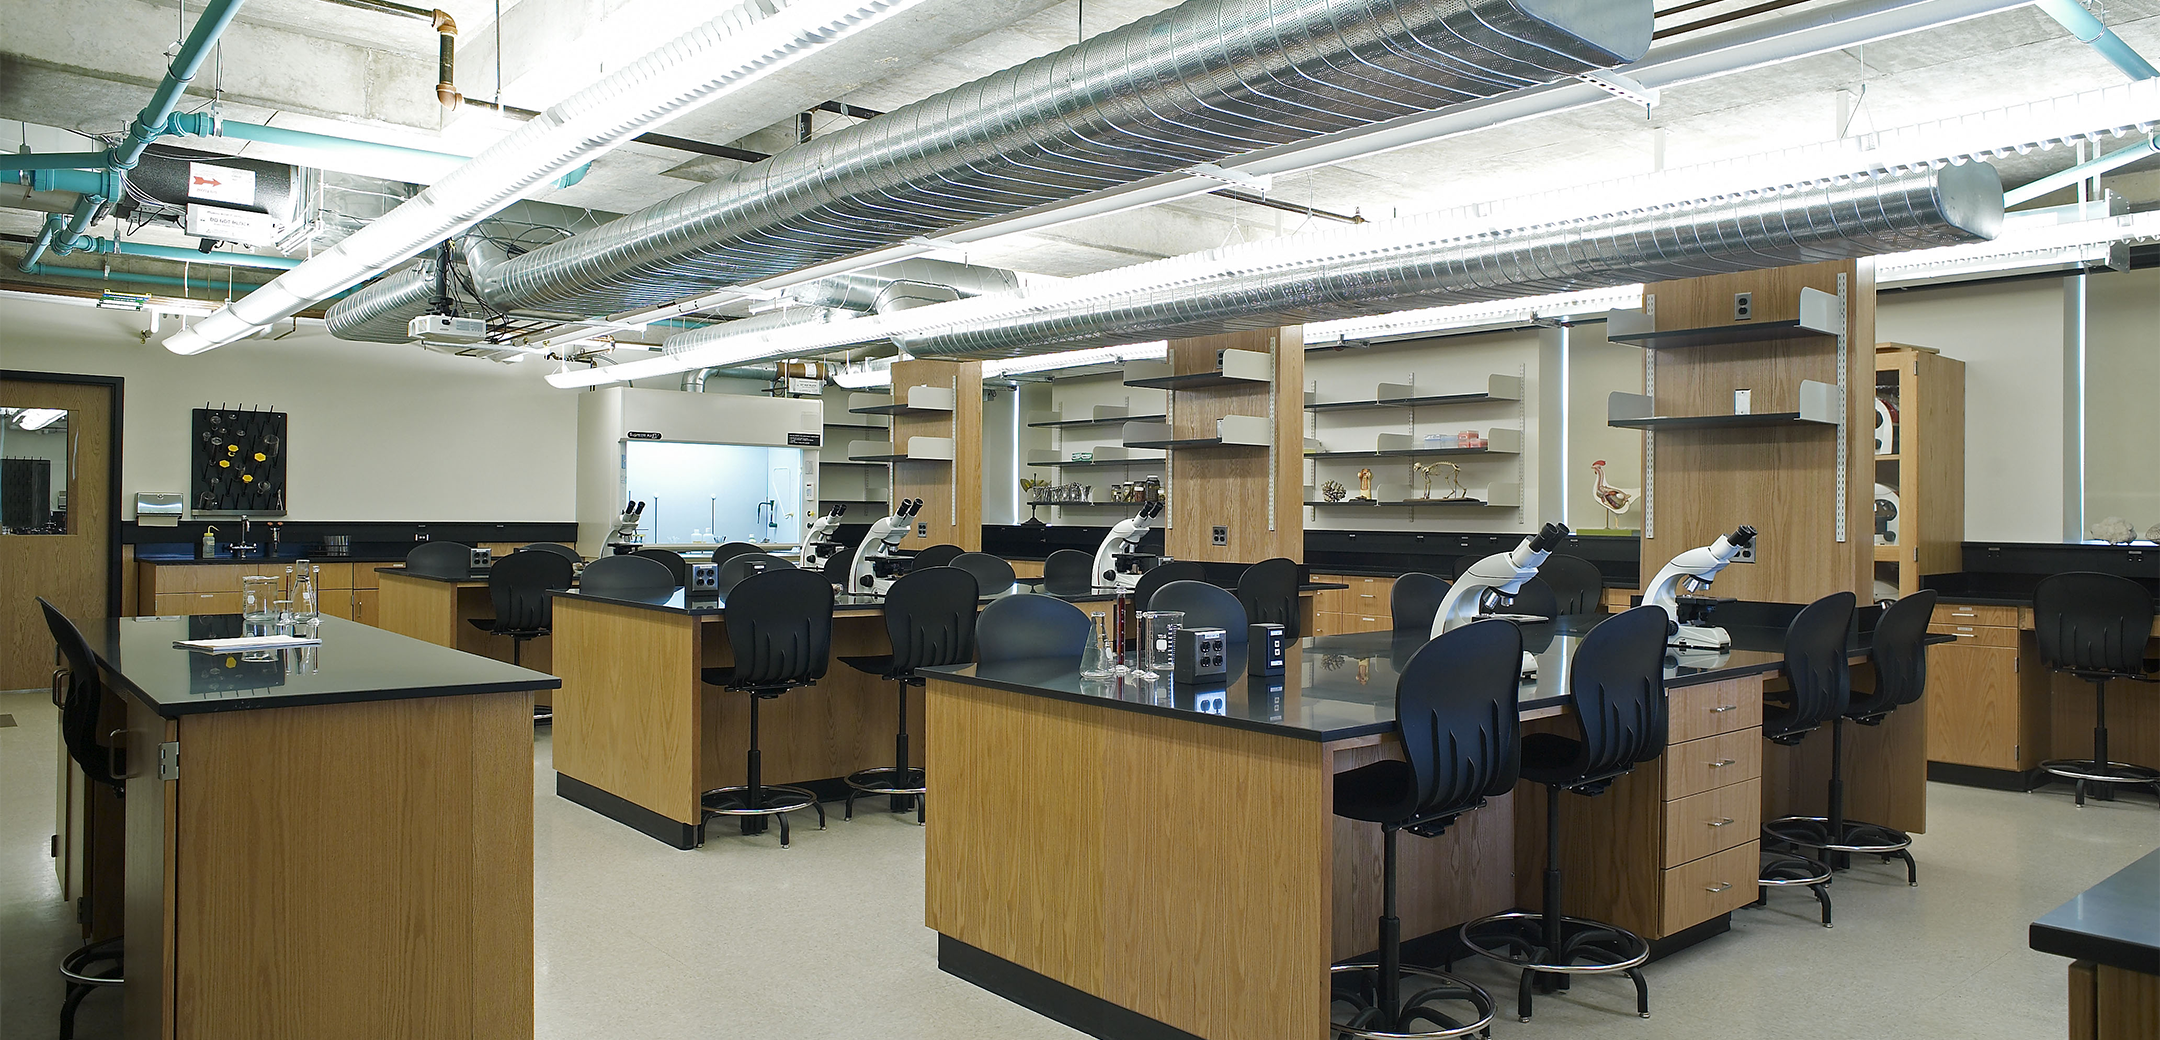 An interior view of the Merner Pfeiffer Hall of Science lab showcasing the workbenches, microscopes and industrial style ceiling.